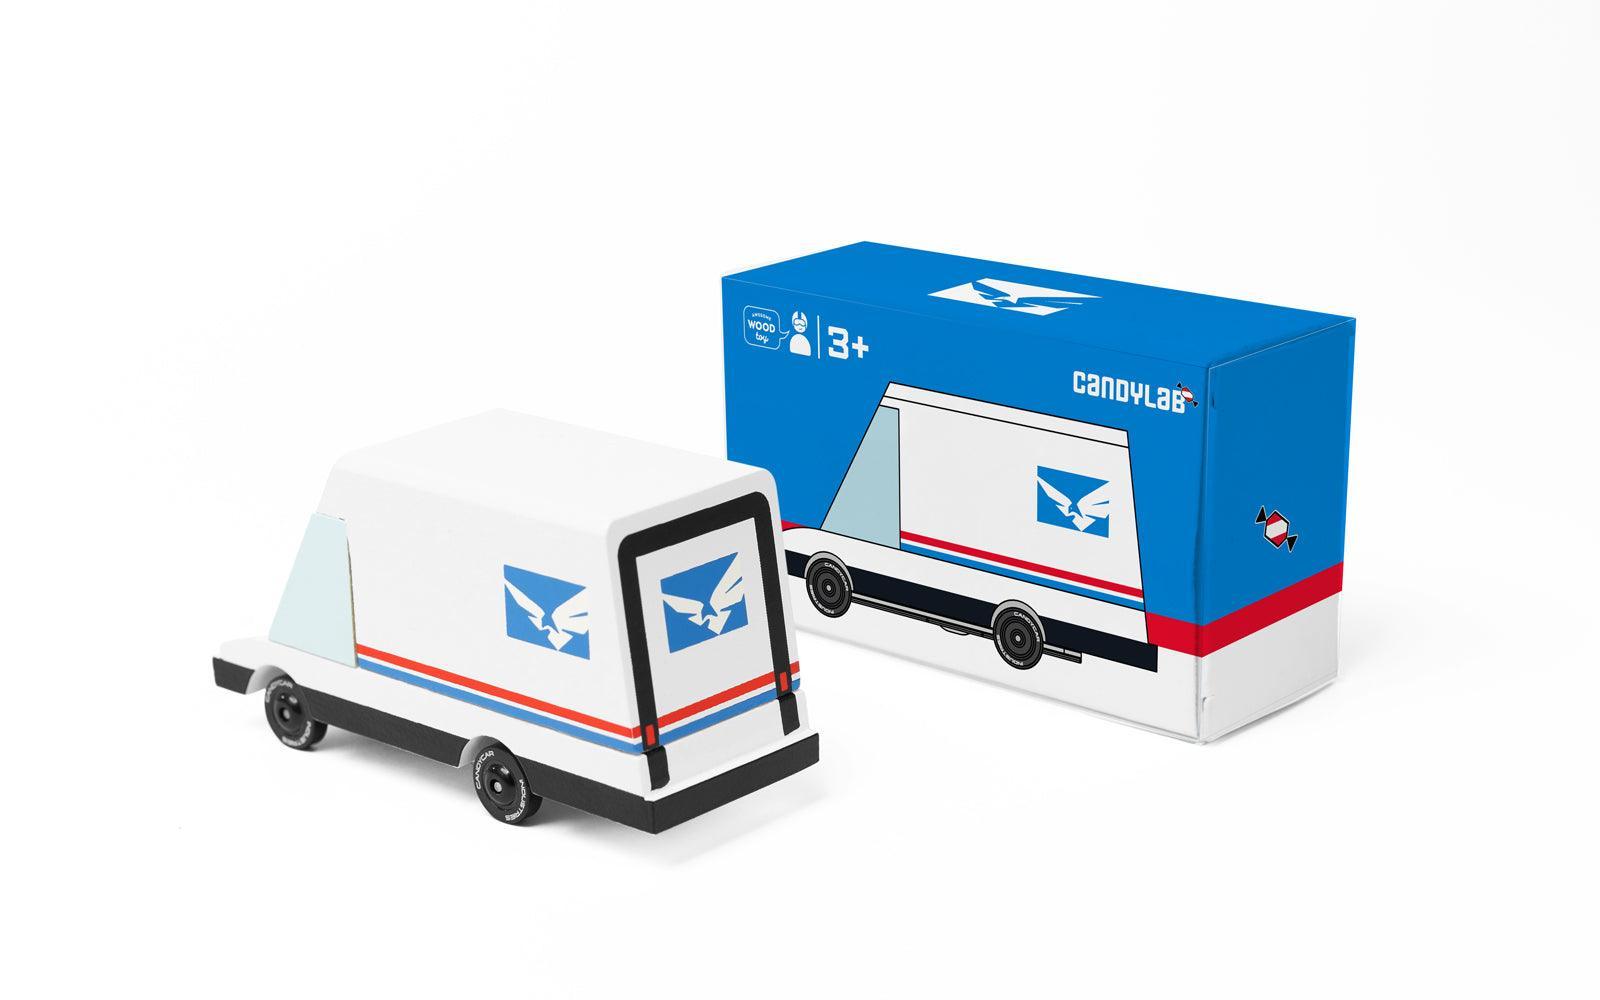 Futuristic Mail Van - Why and Whale